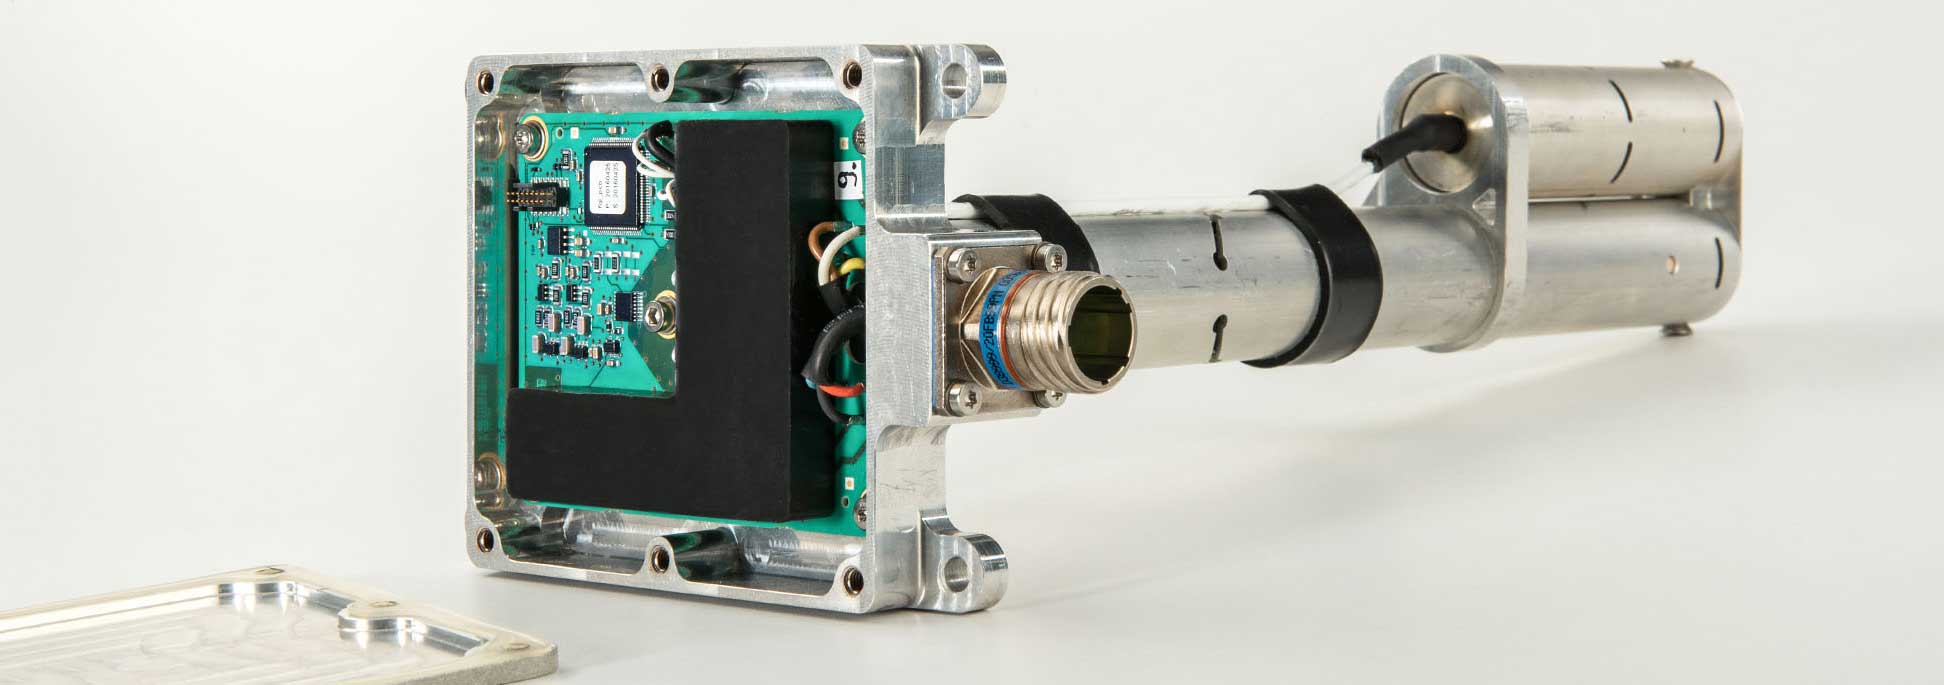 Tank sensor with open, visible electronics for flight applications